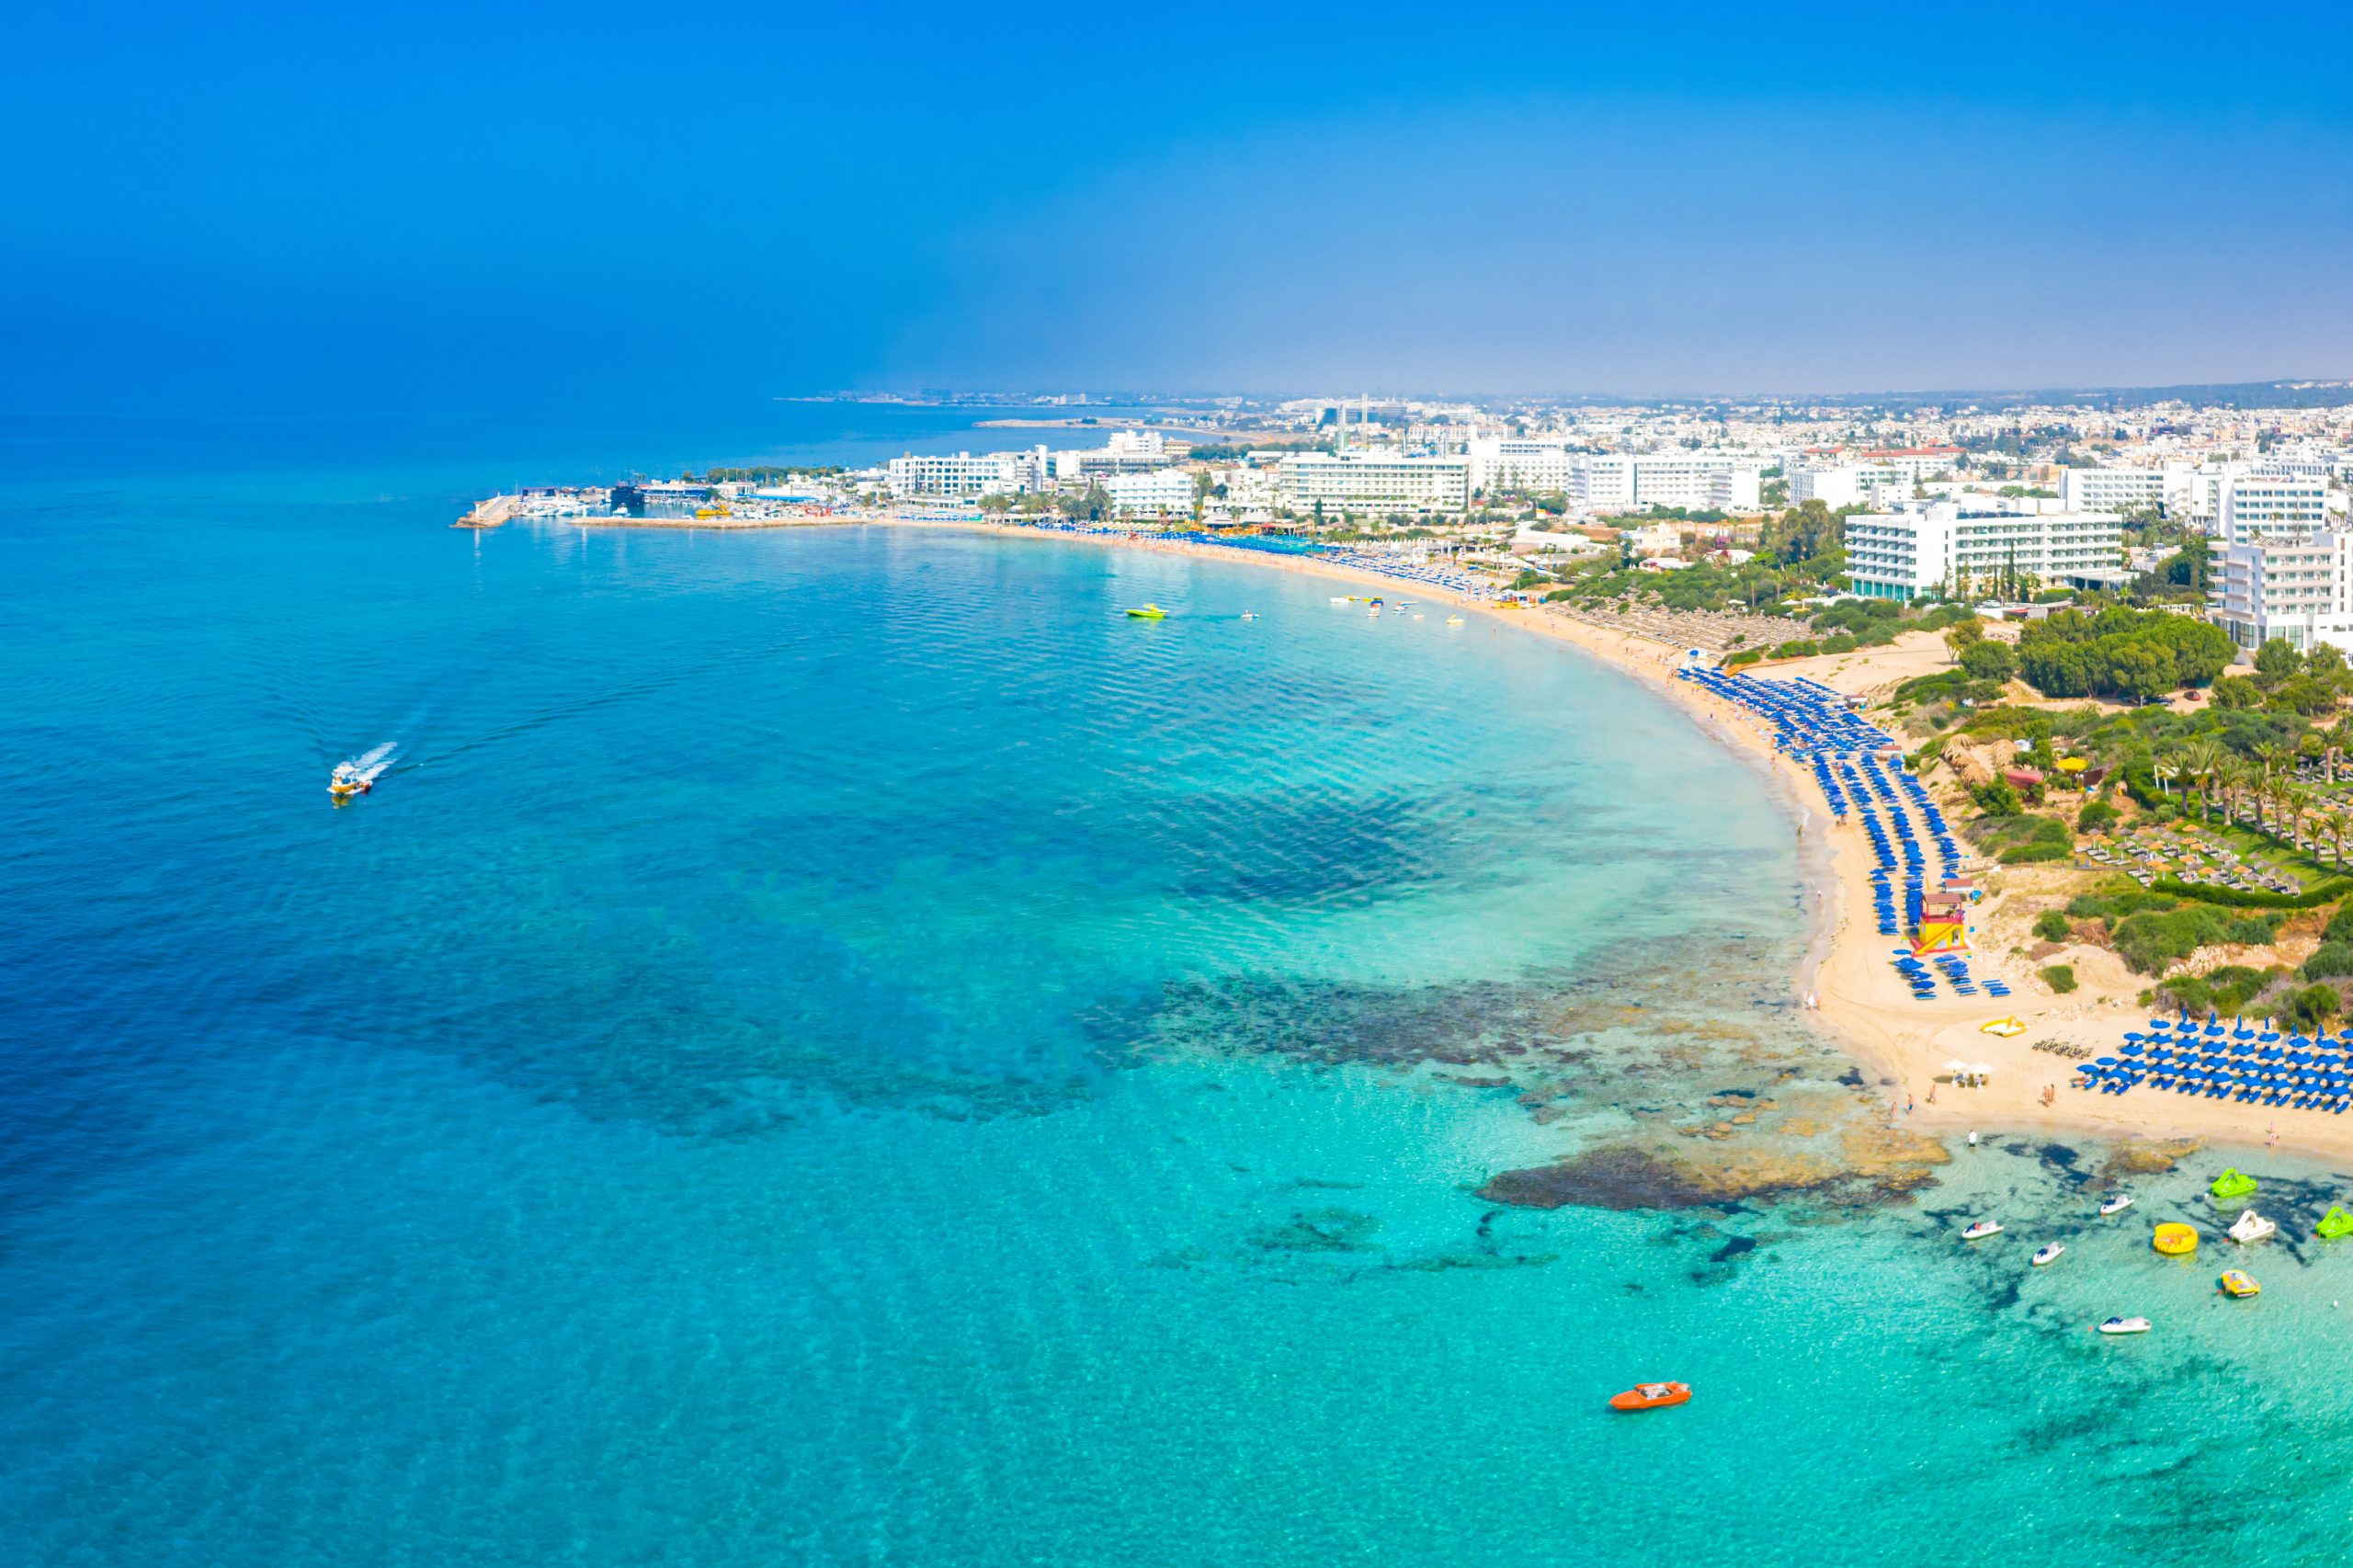 Crystal blue waters of the Cyprus Coast